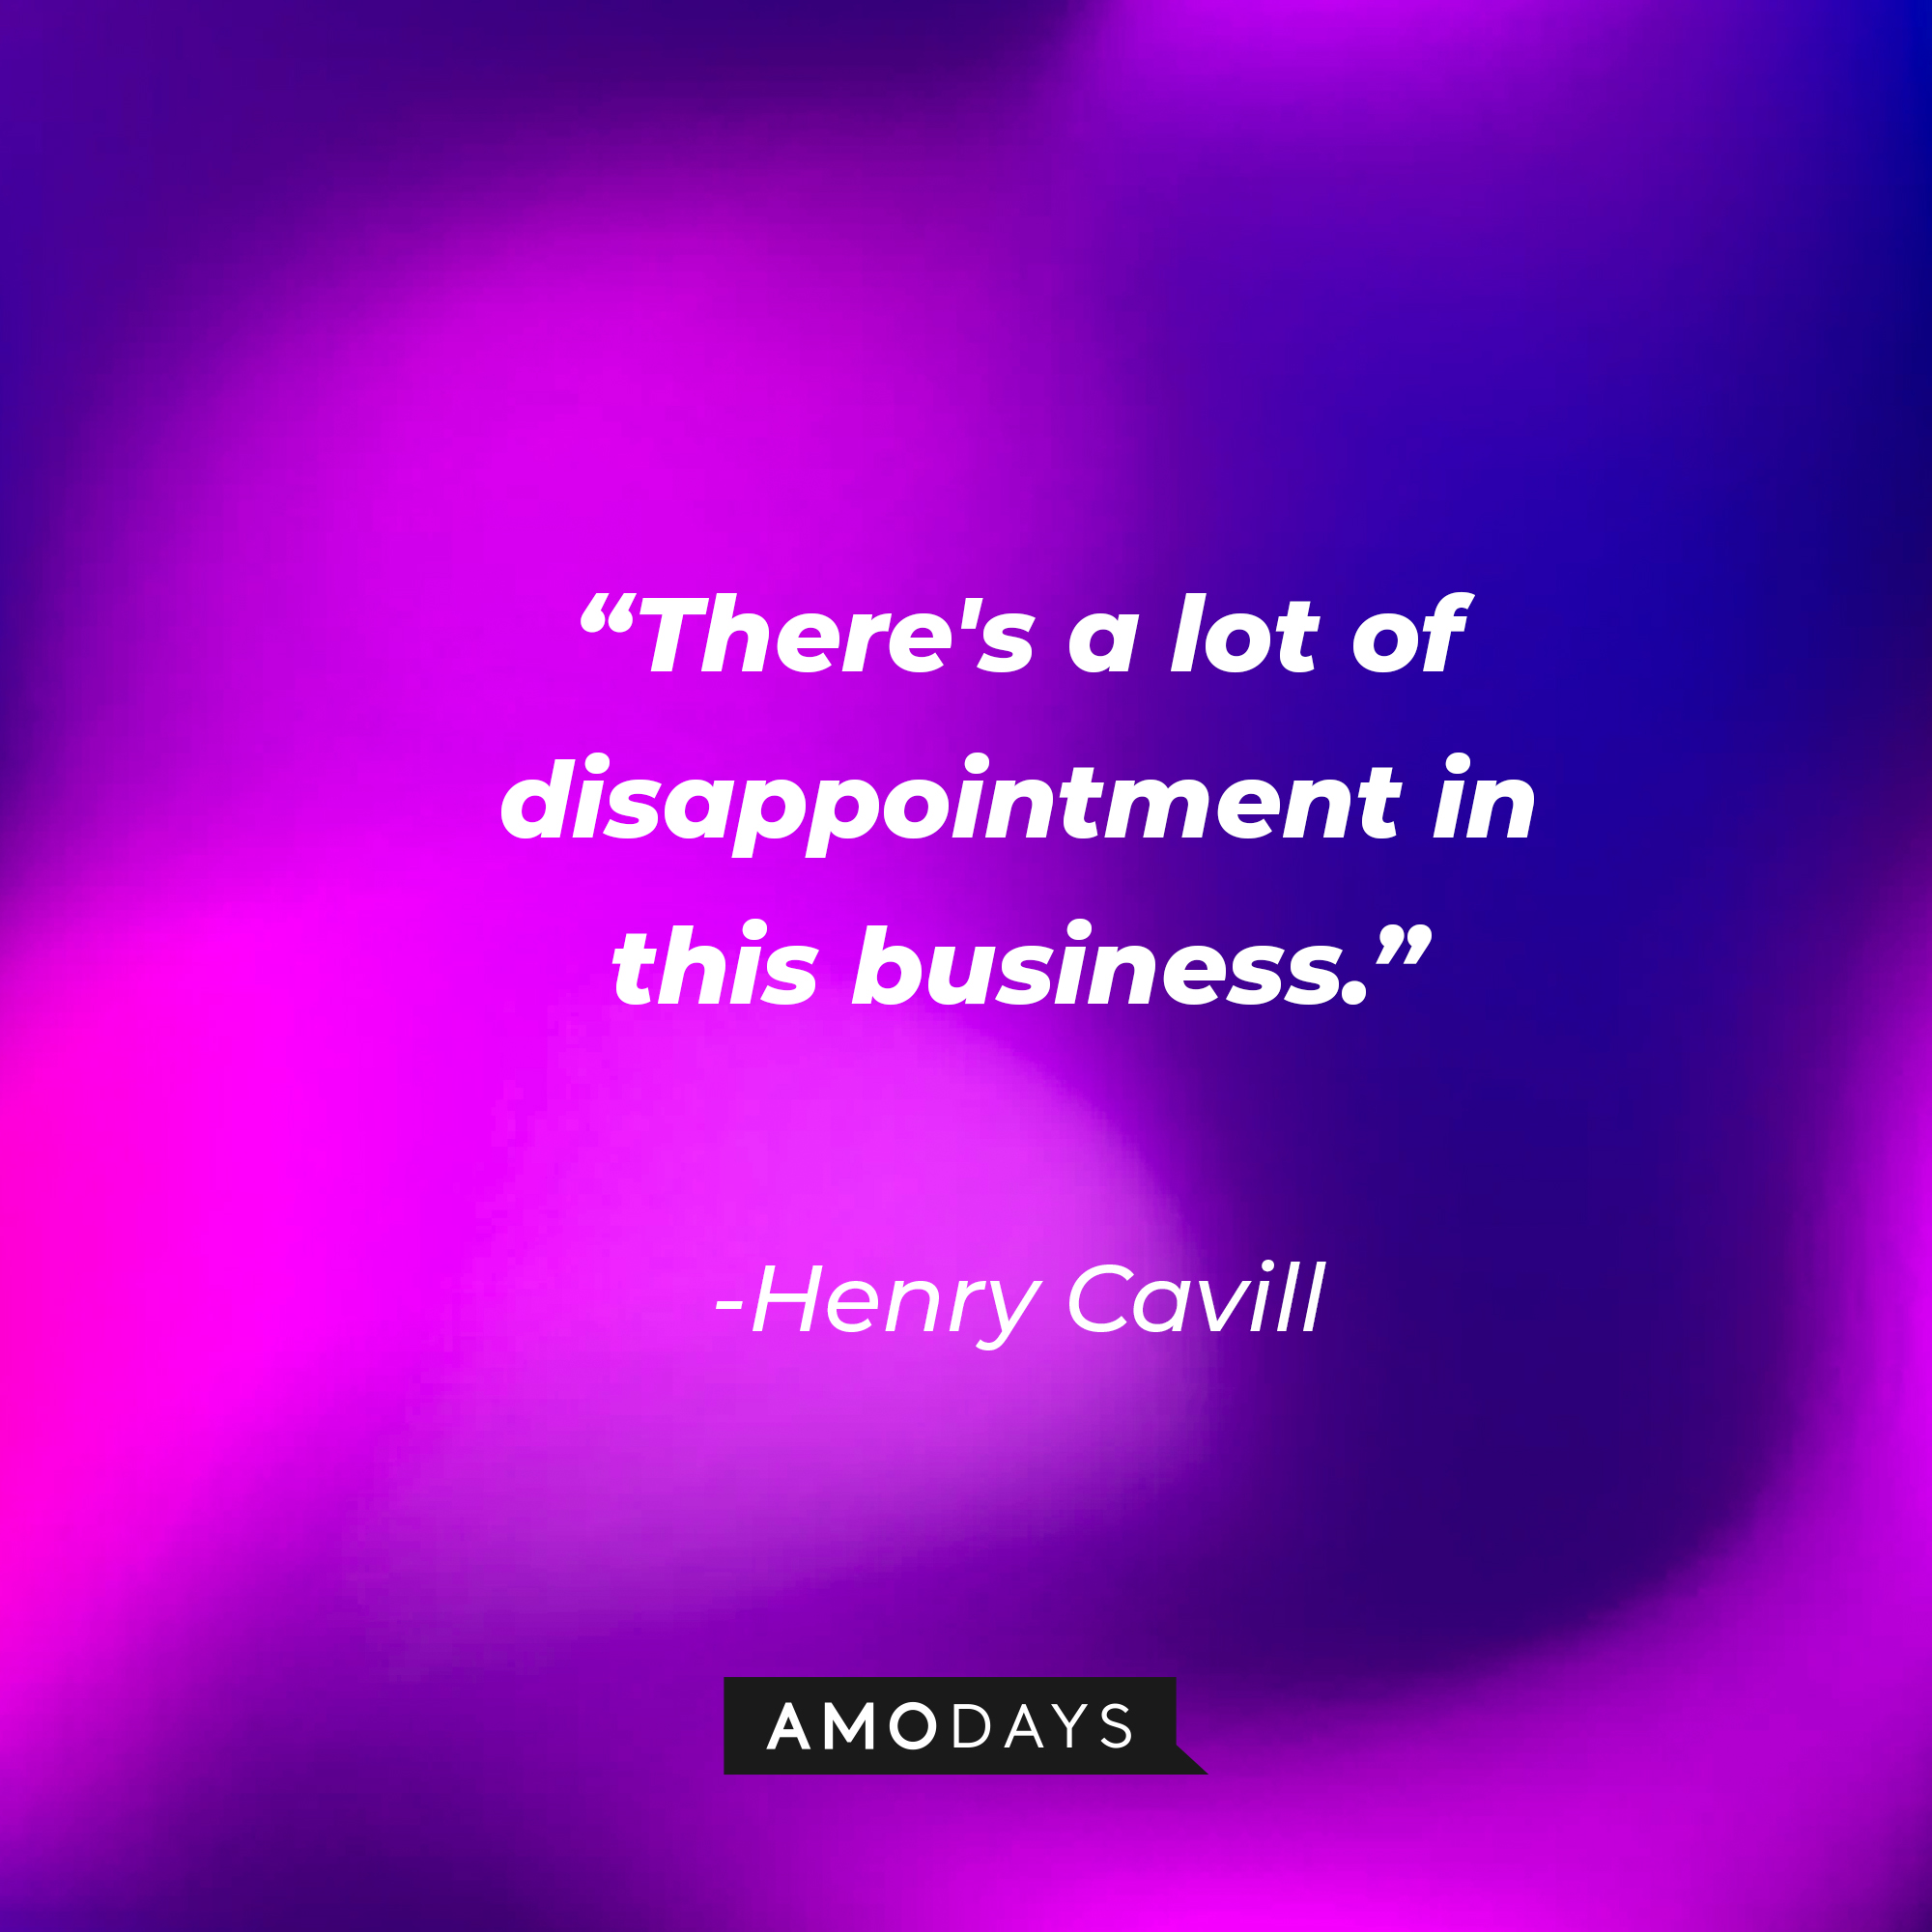 Henry Cavill’s quote: “There's a lot of disappointment in this business." | Source: AmoDays